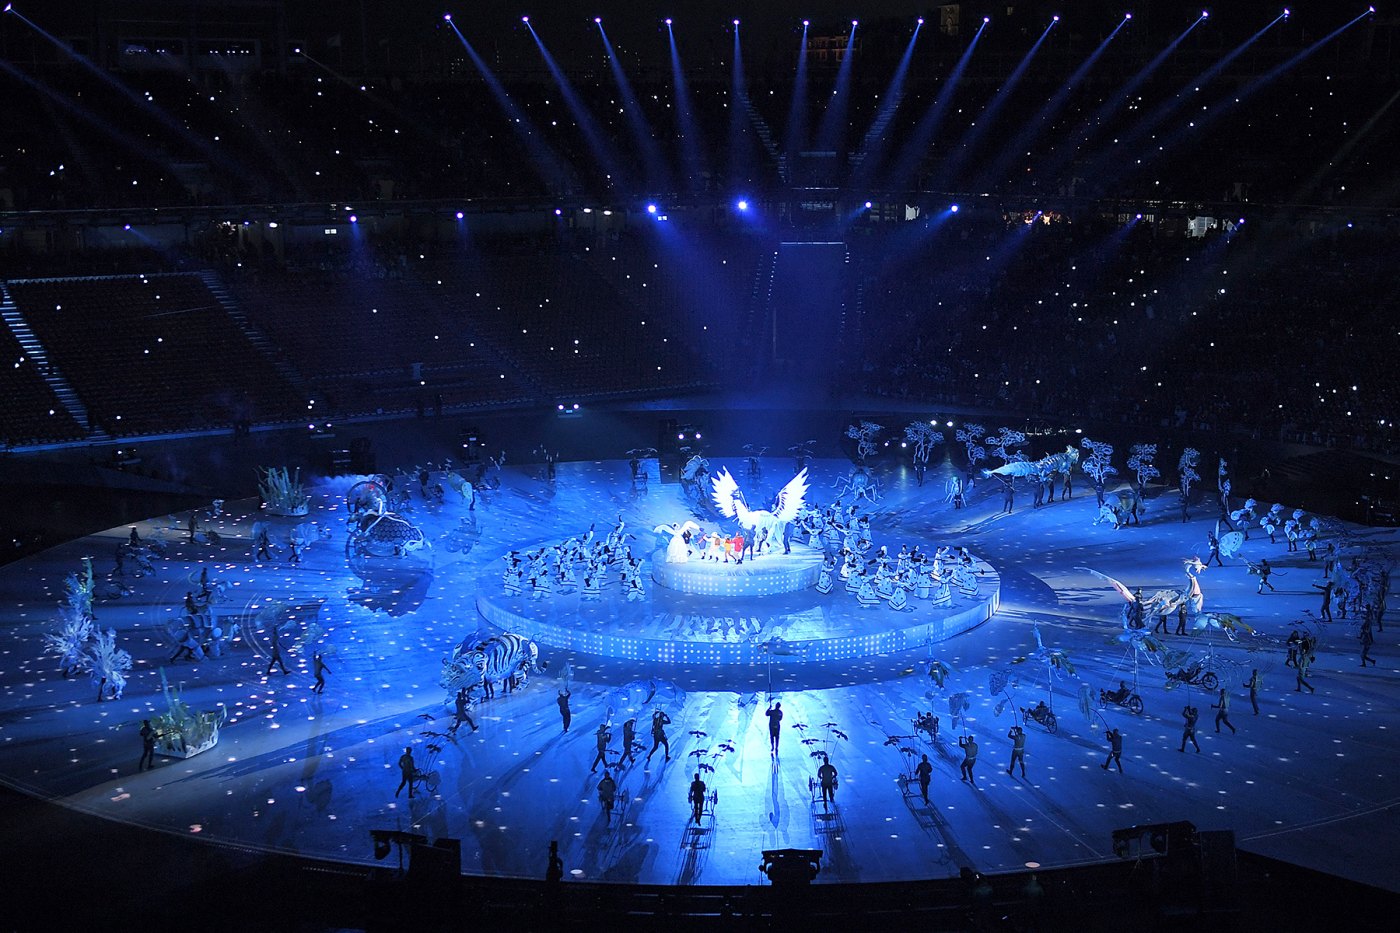 2018 Winter Olympics Opening Ceremony in PyeongChang Photos